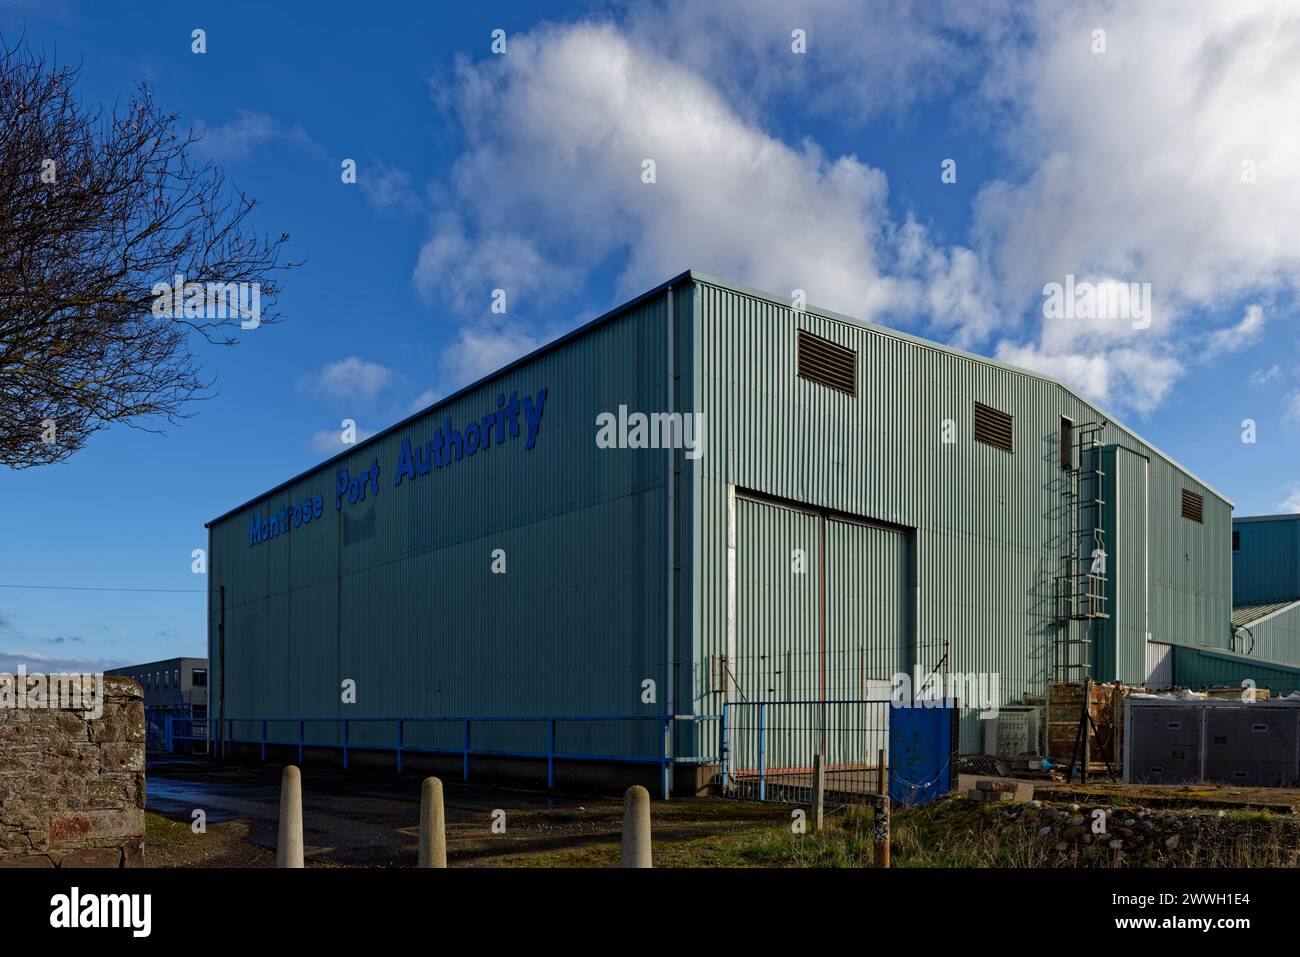 A Galvanised steel clad Warehouse of the Montrose Port Authority on the perimeter of the Port Complex, with its large double Hanger doors shut. Stock Photo